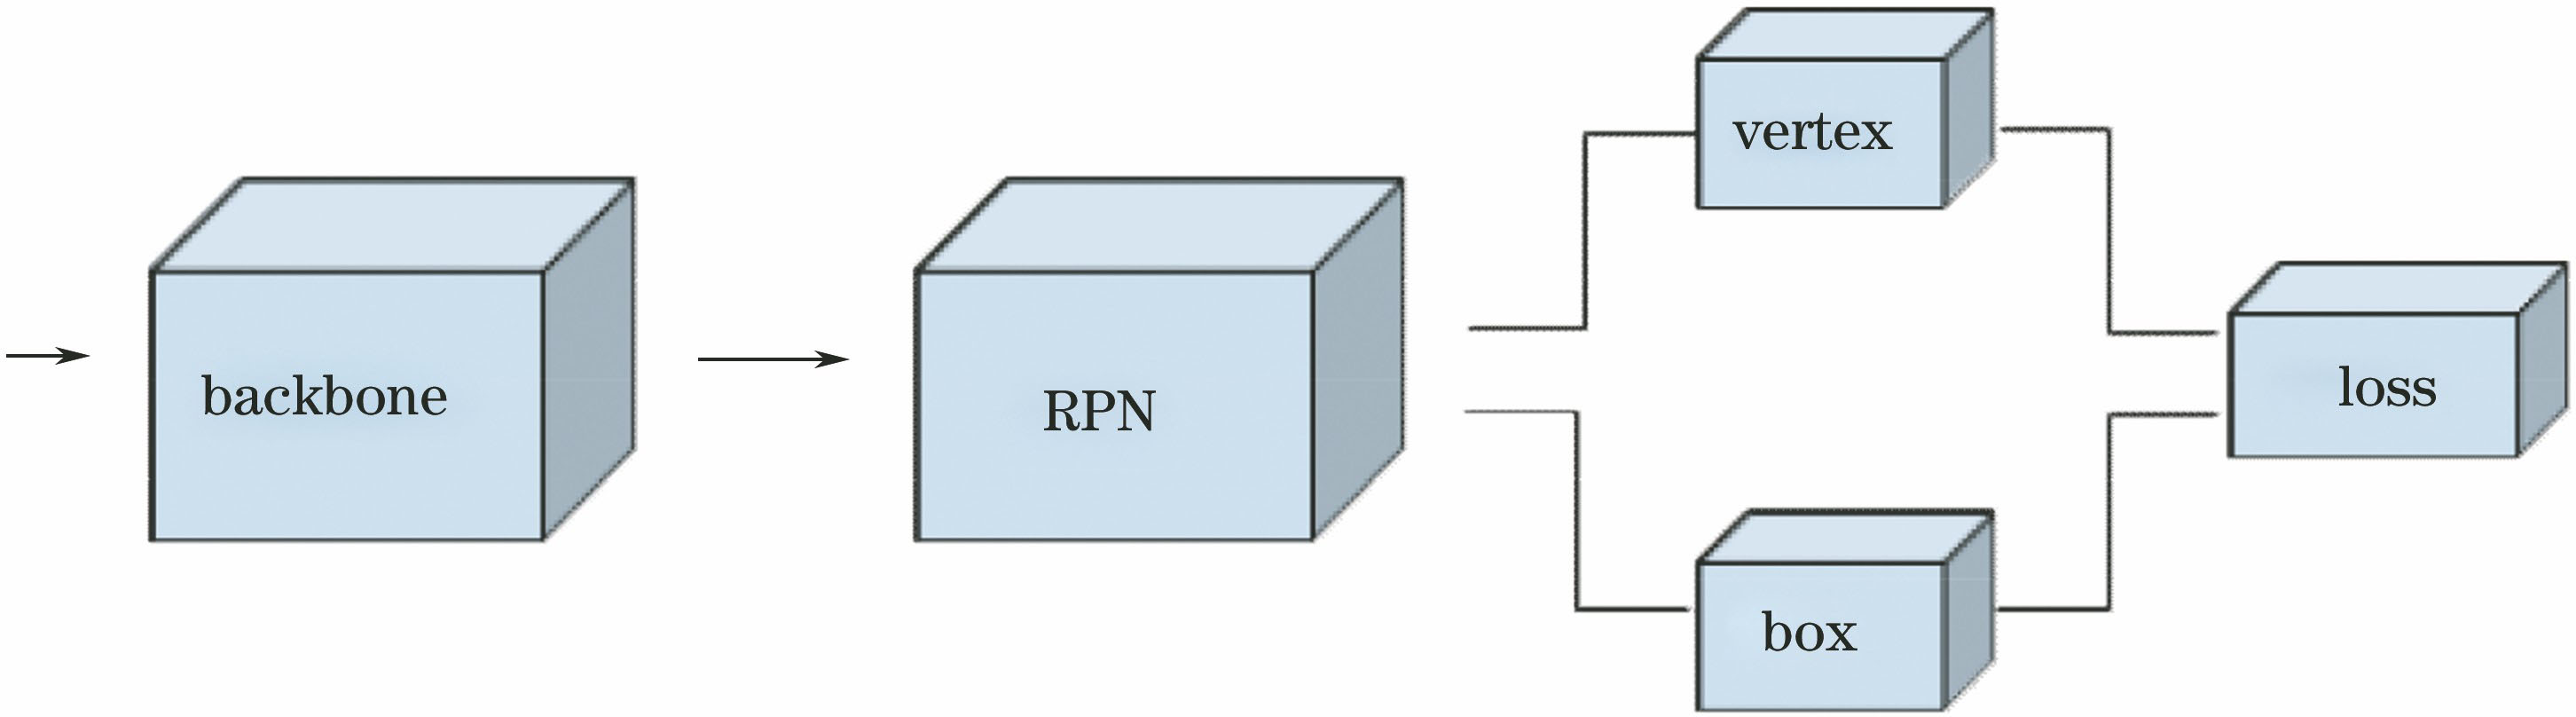 Architecture of neural network